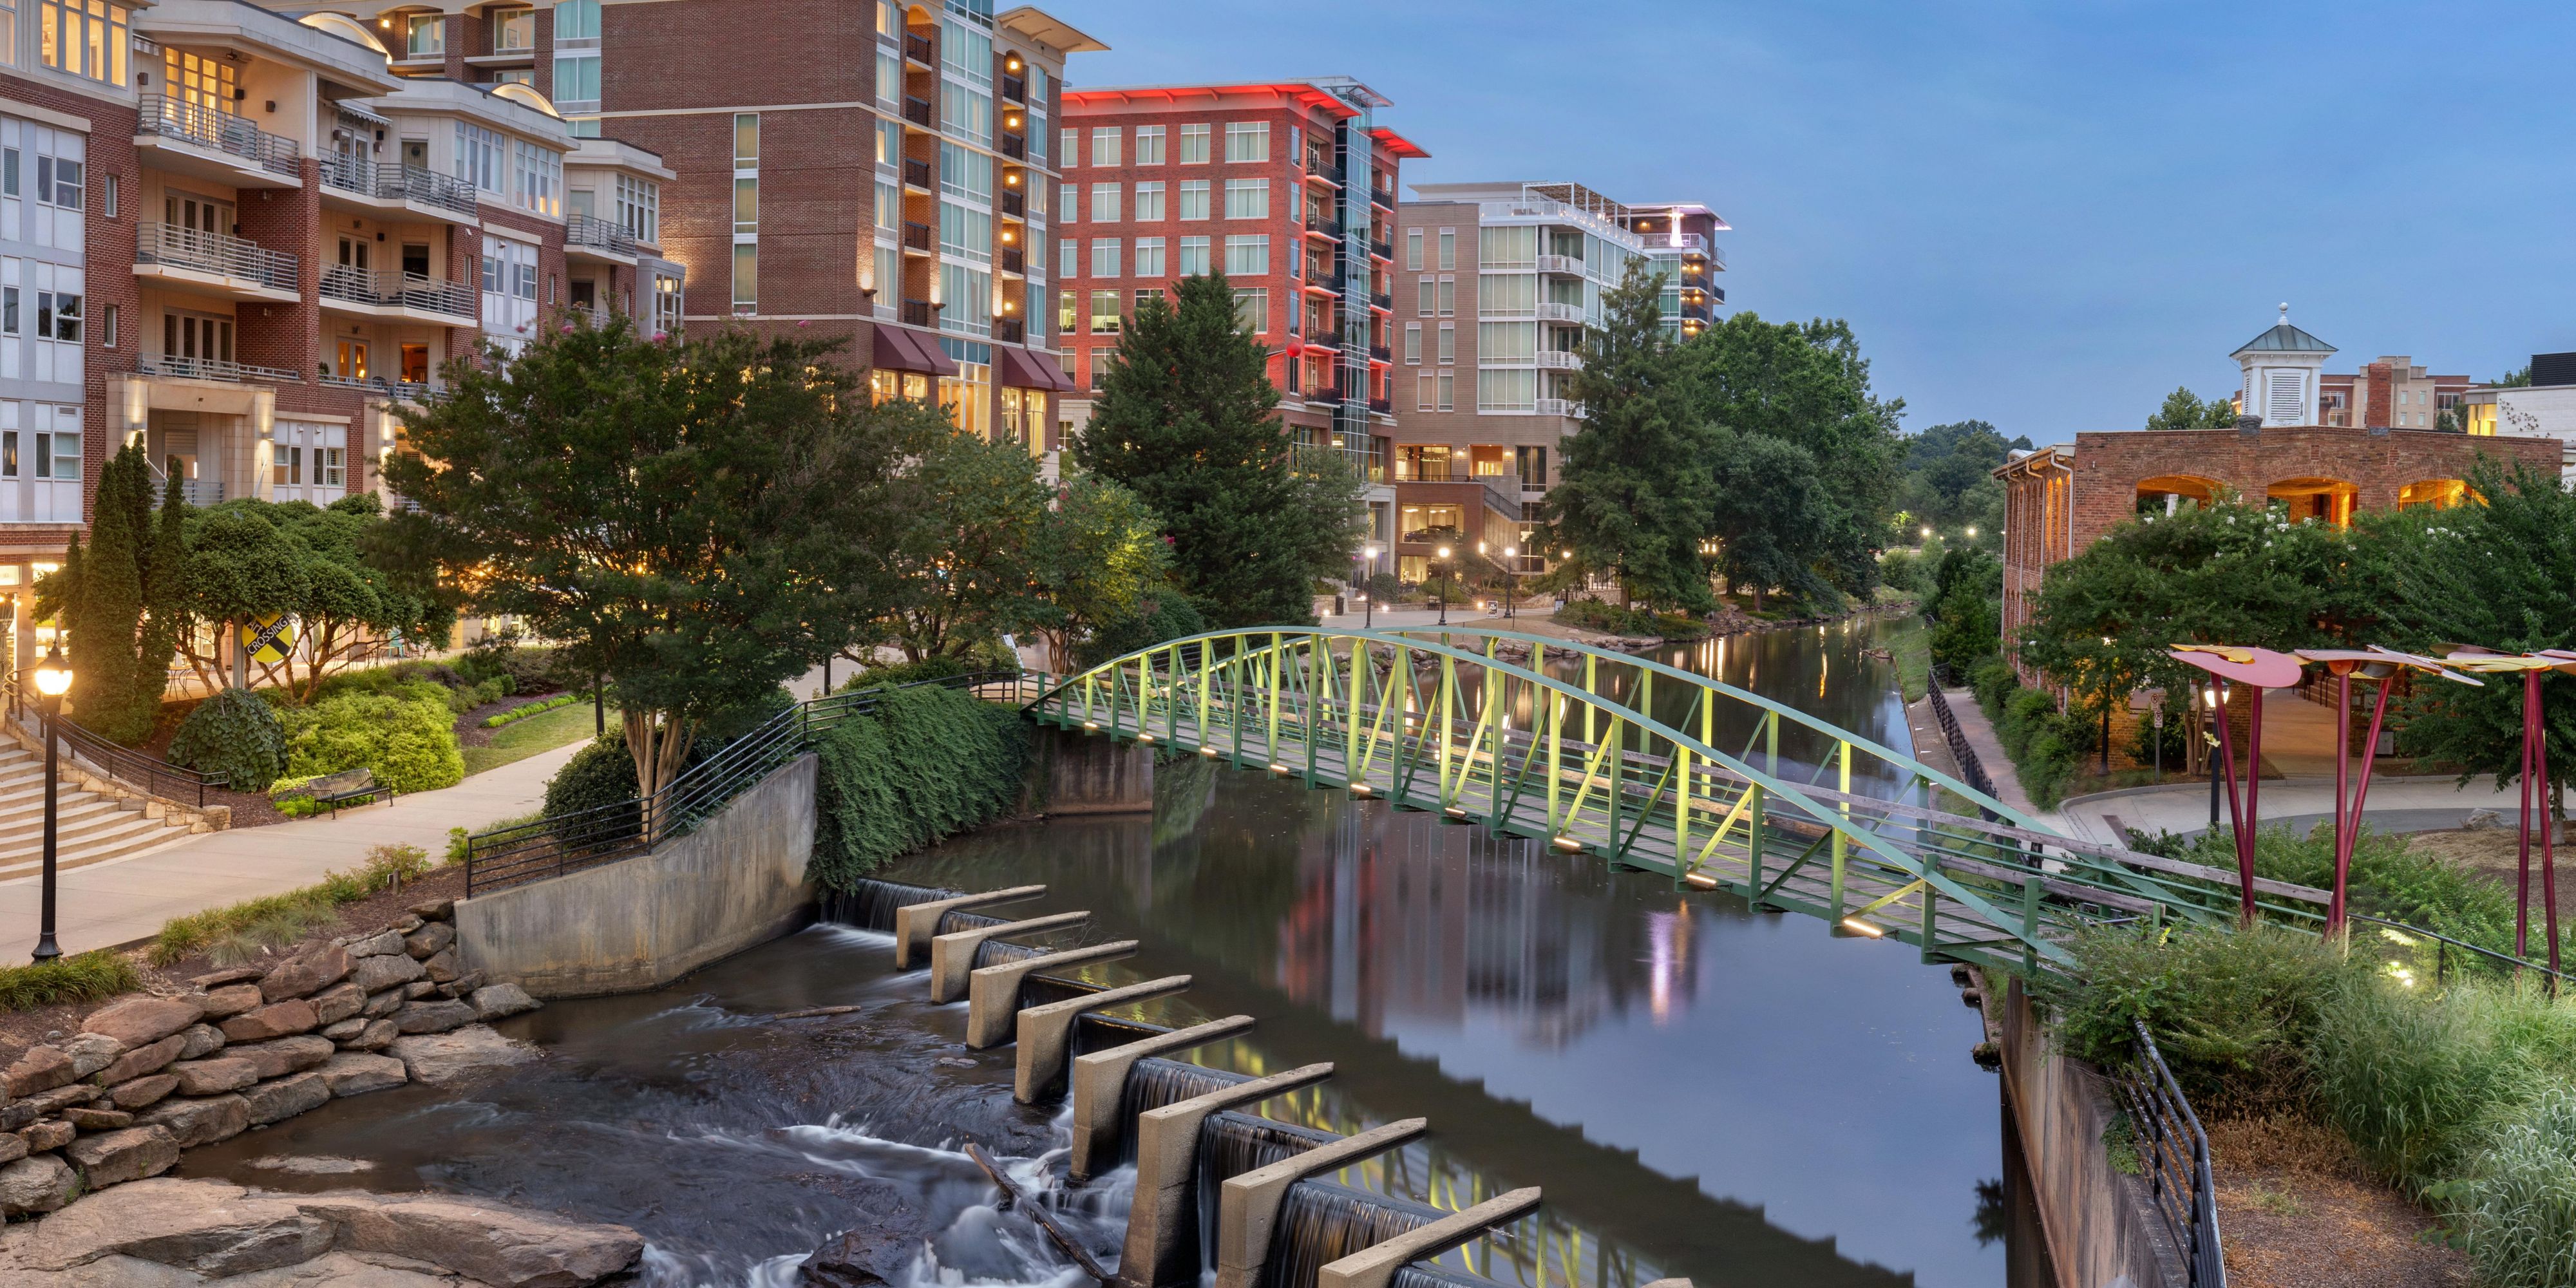 We are located in the heart of Downtown Greenville directly on Main Street and within walking distance to countless shops, dining and entertainment, you are bound to find something for everyone and experience southern hospitality like never before. Stay with us today on your next visit to this majestic city.